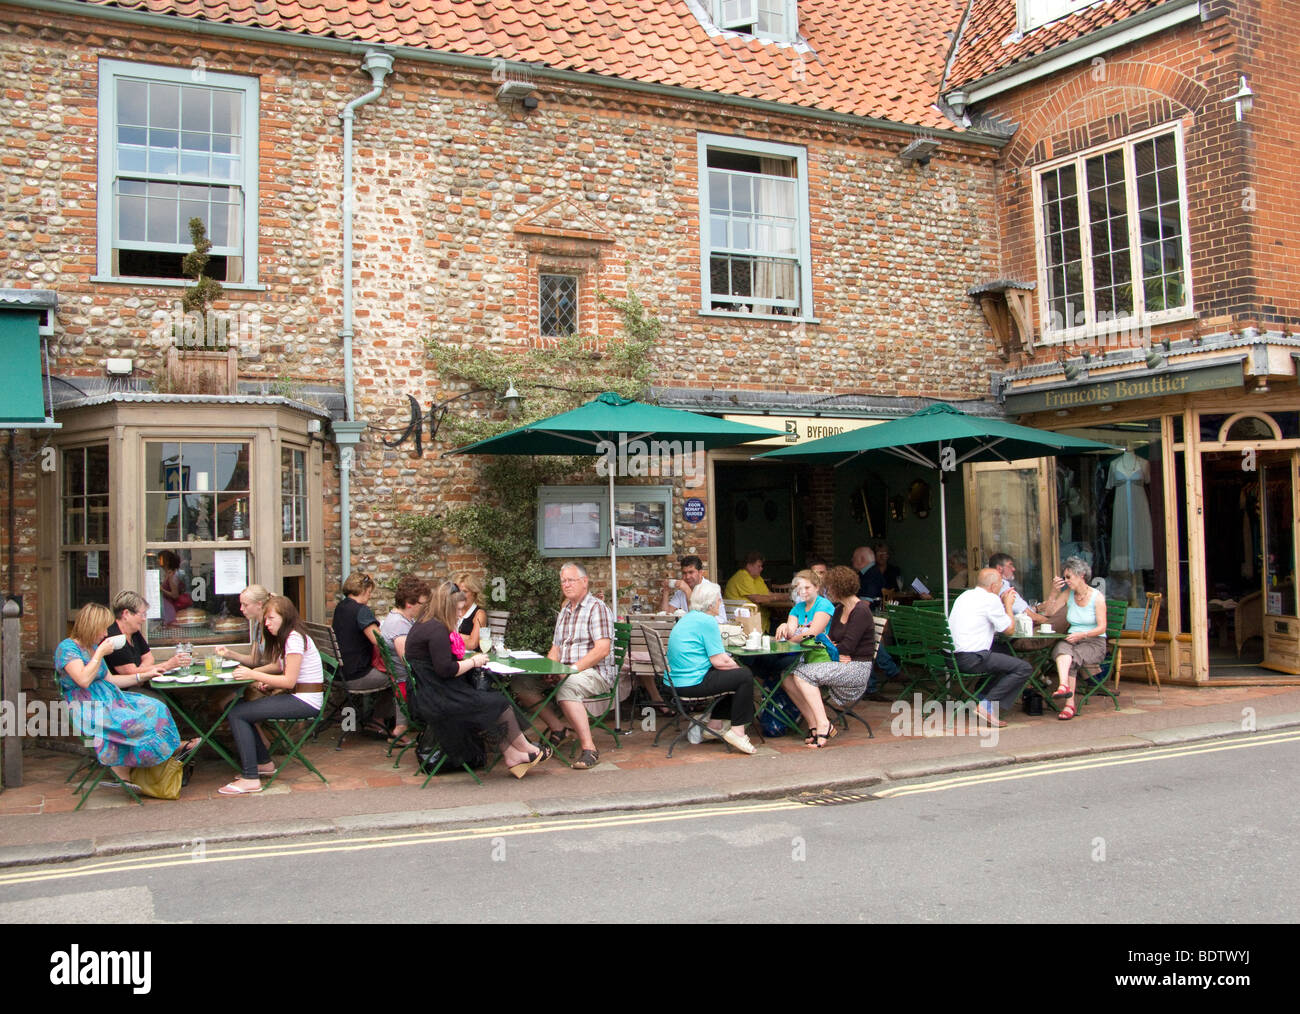 People sat outside eating lunch, Holt Stock Photo